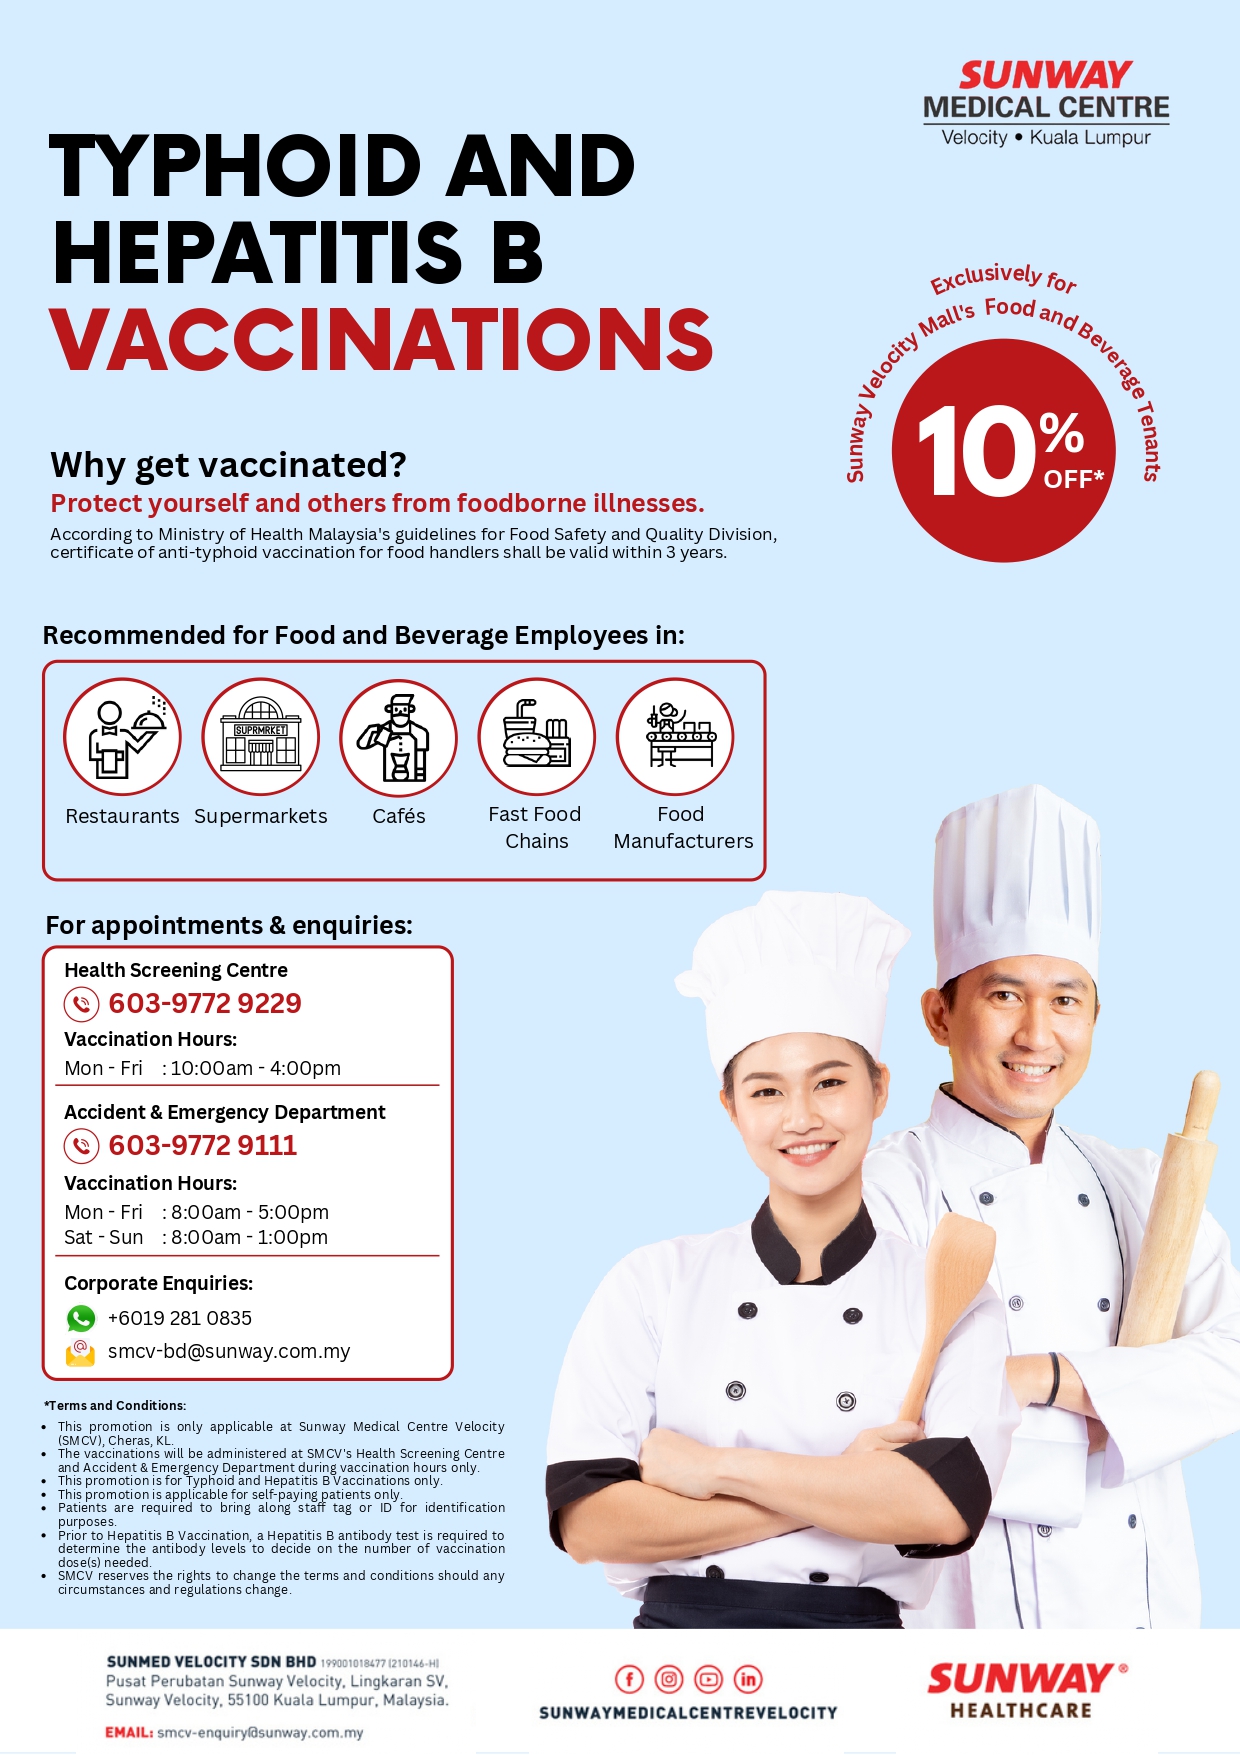 Typhoid and Hepatitis B Vaccinations (Exclusively for Sunway Velocity Mall's F&B Tenants)